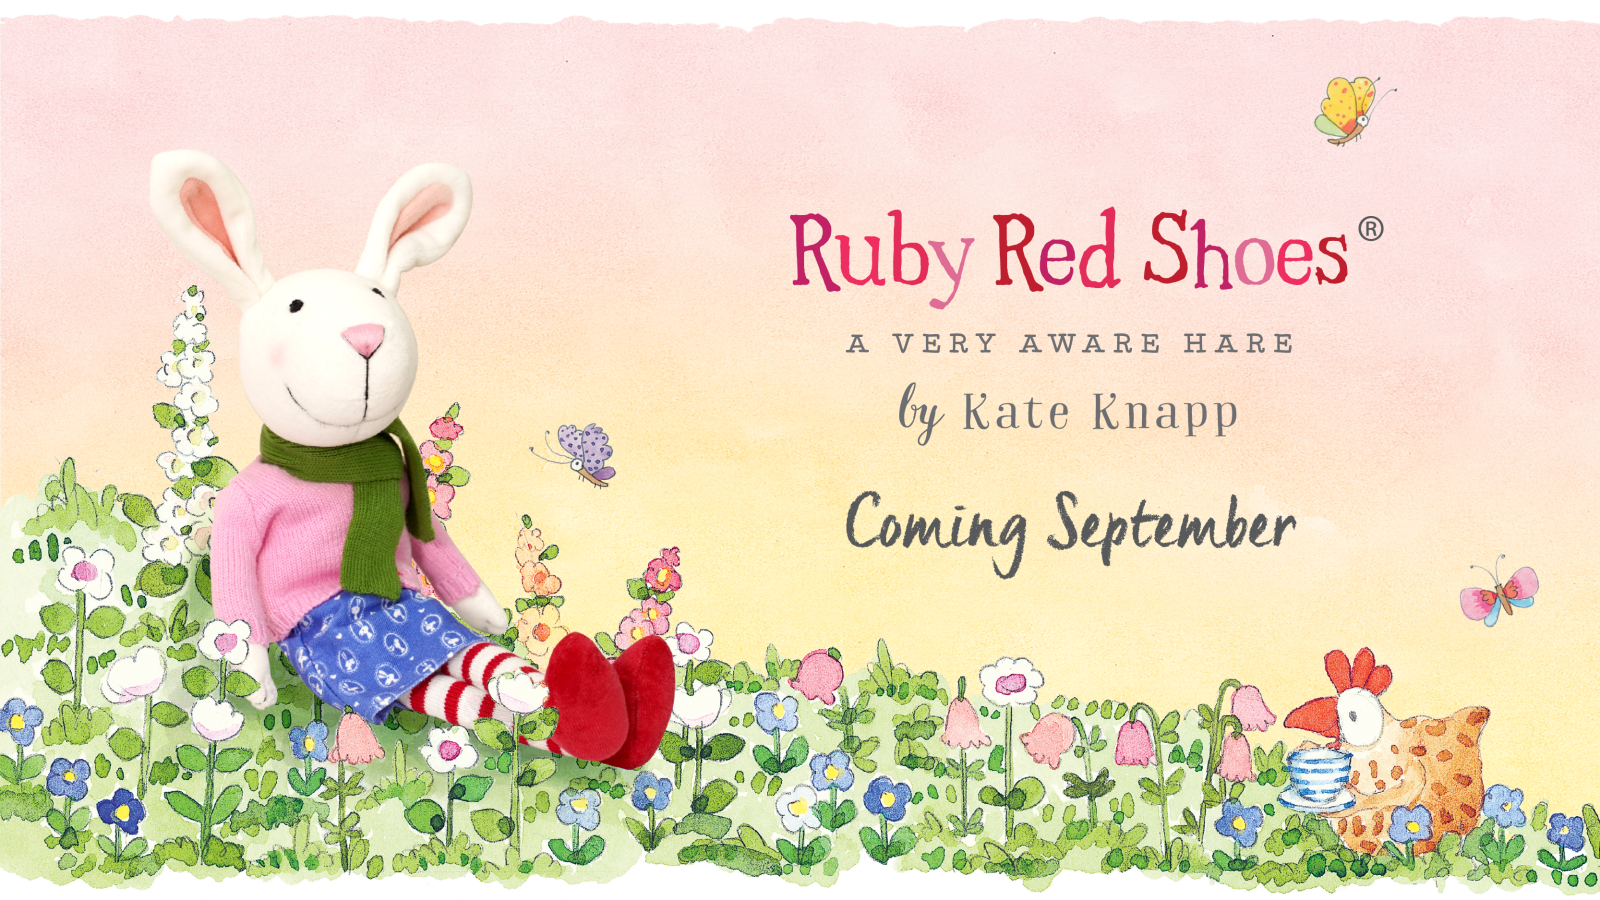 Ruby Red Shoes Doll is coming soon